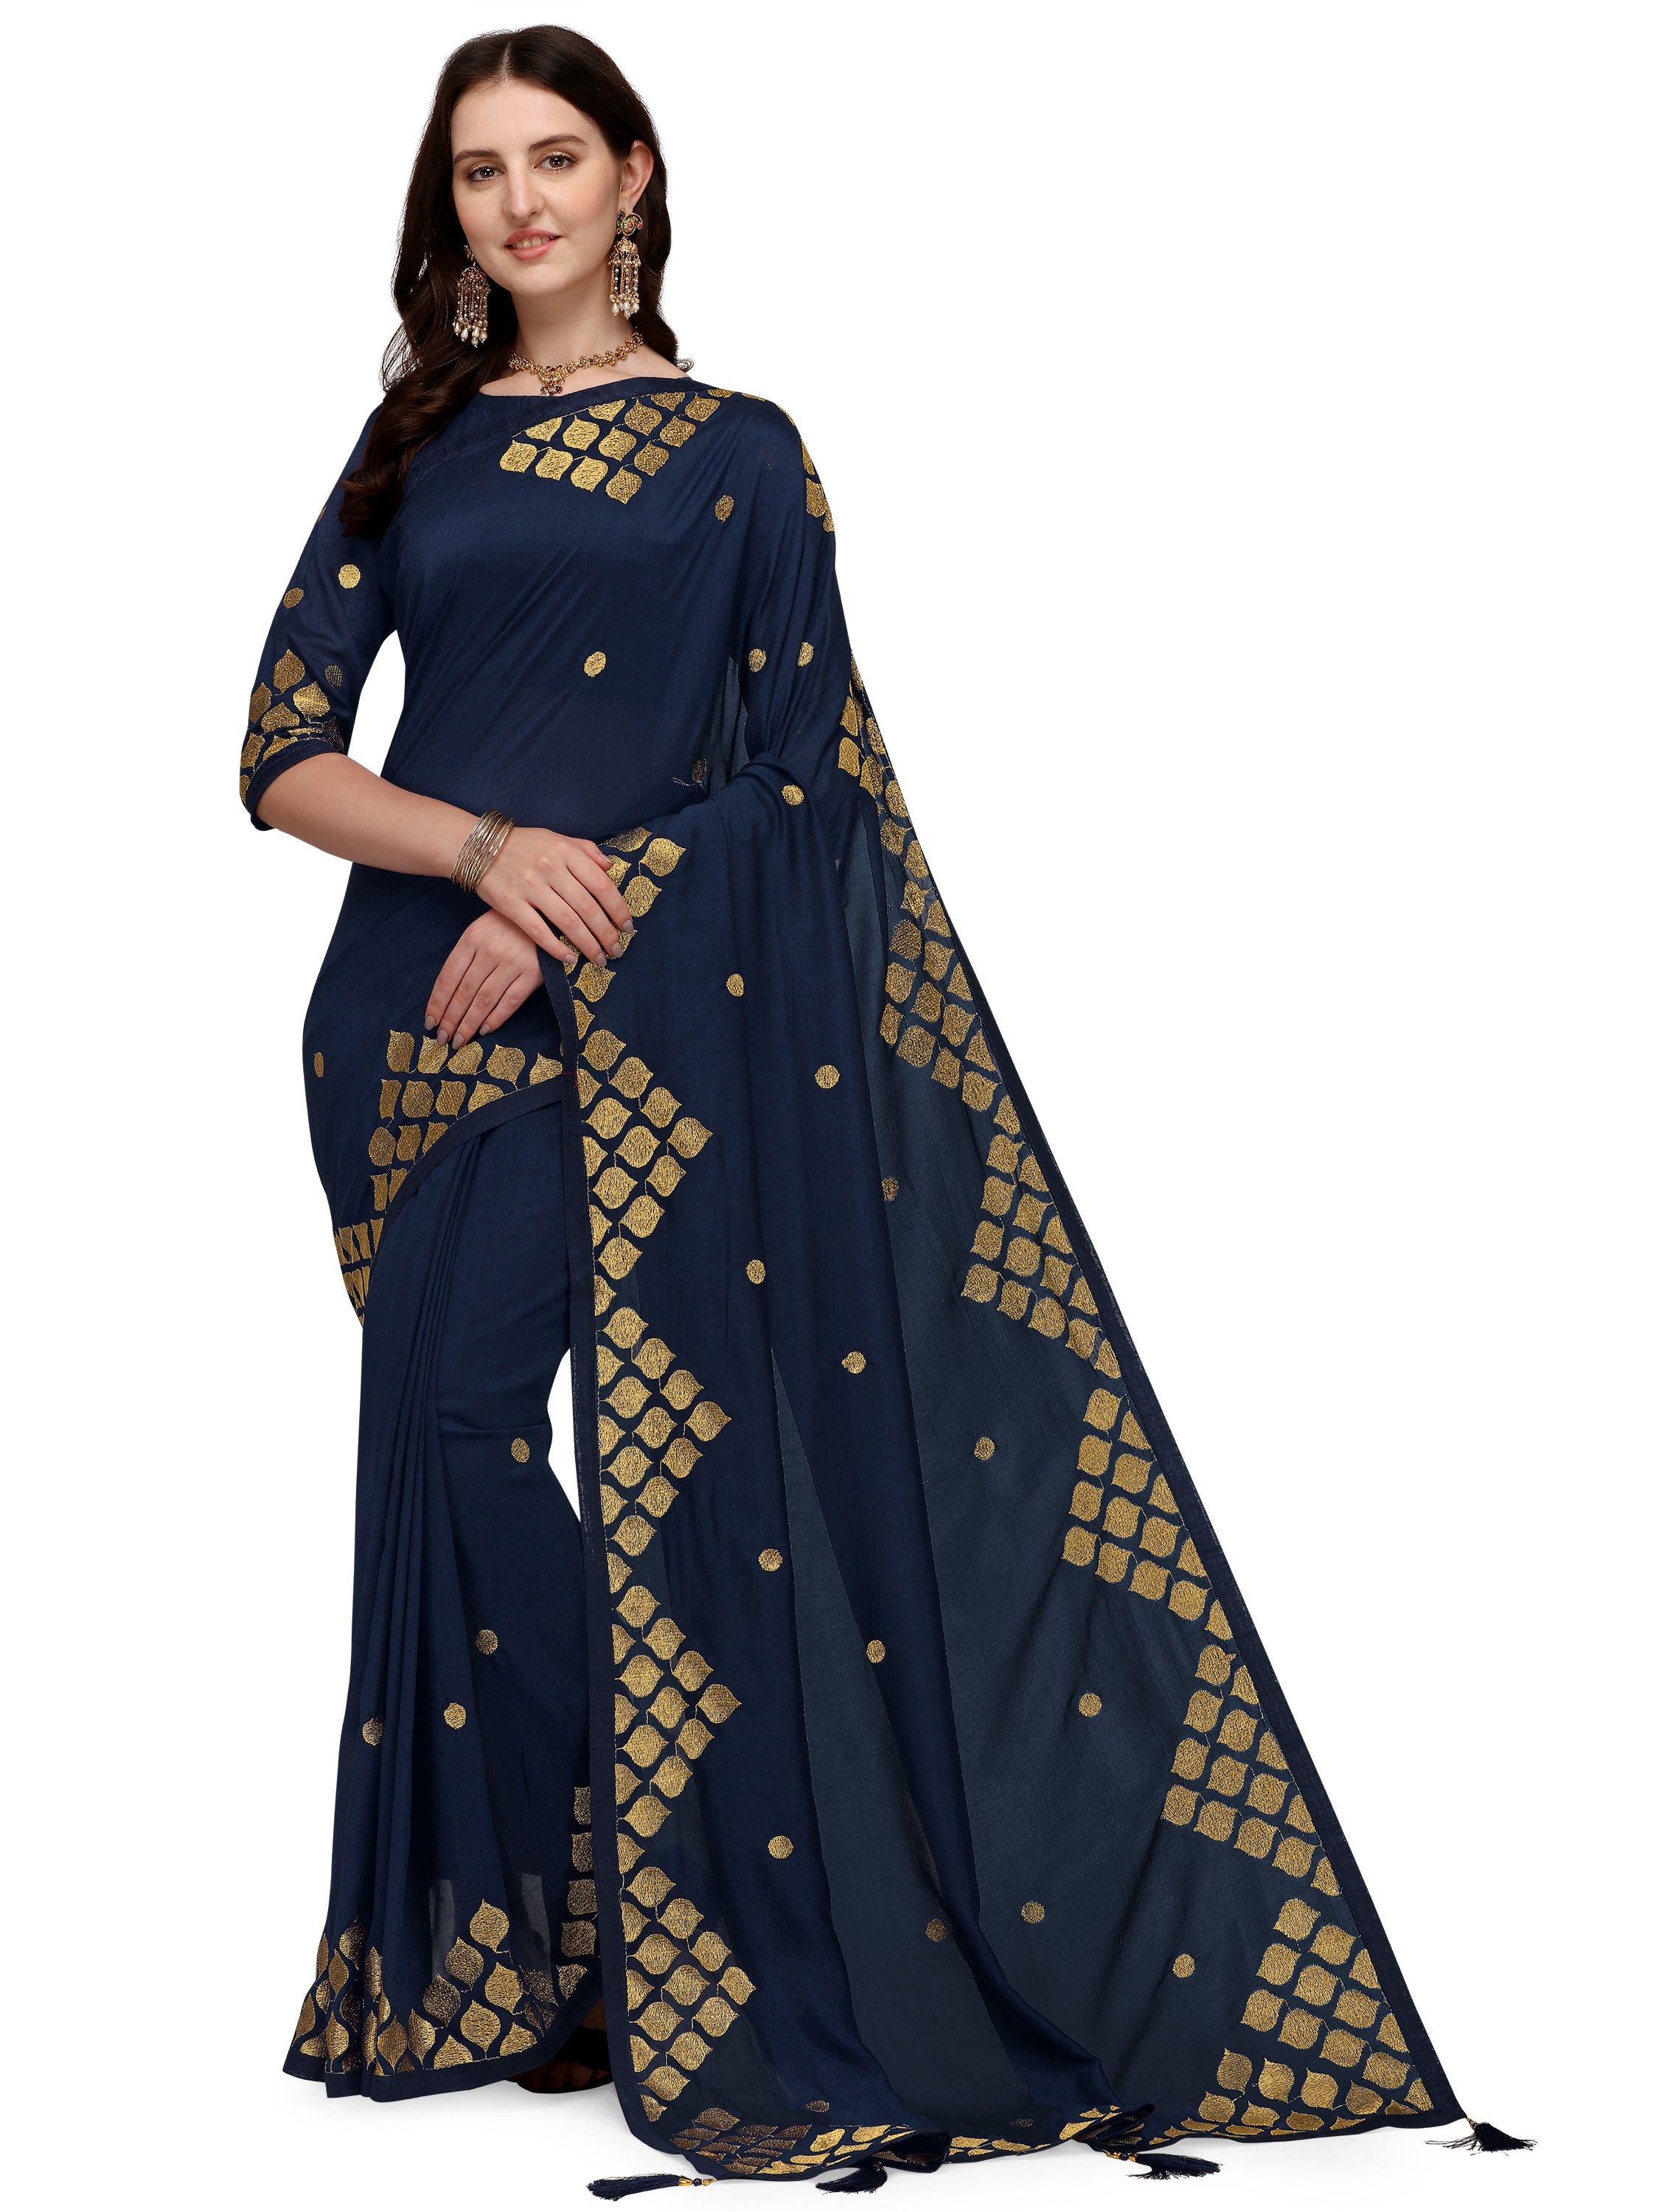 Women's Zari Embroided Paty Wear Traditional Silk Blend Saree With Blouse Piece (Dark Blue) - NIMIDHYA